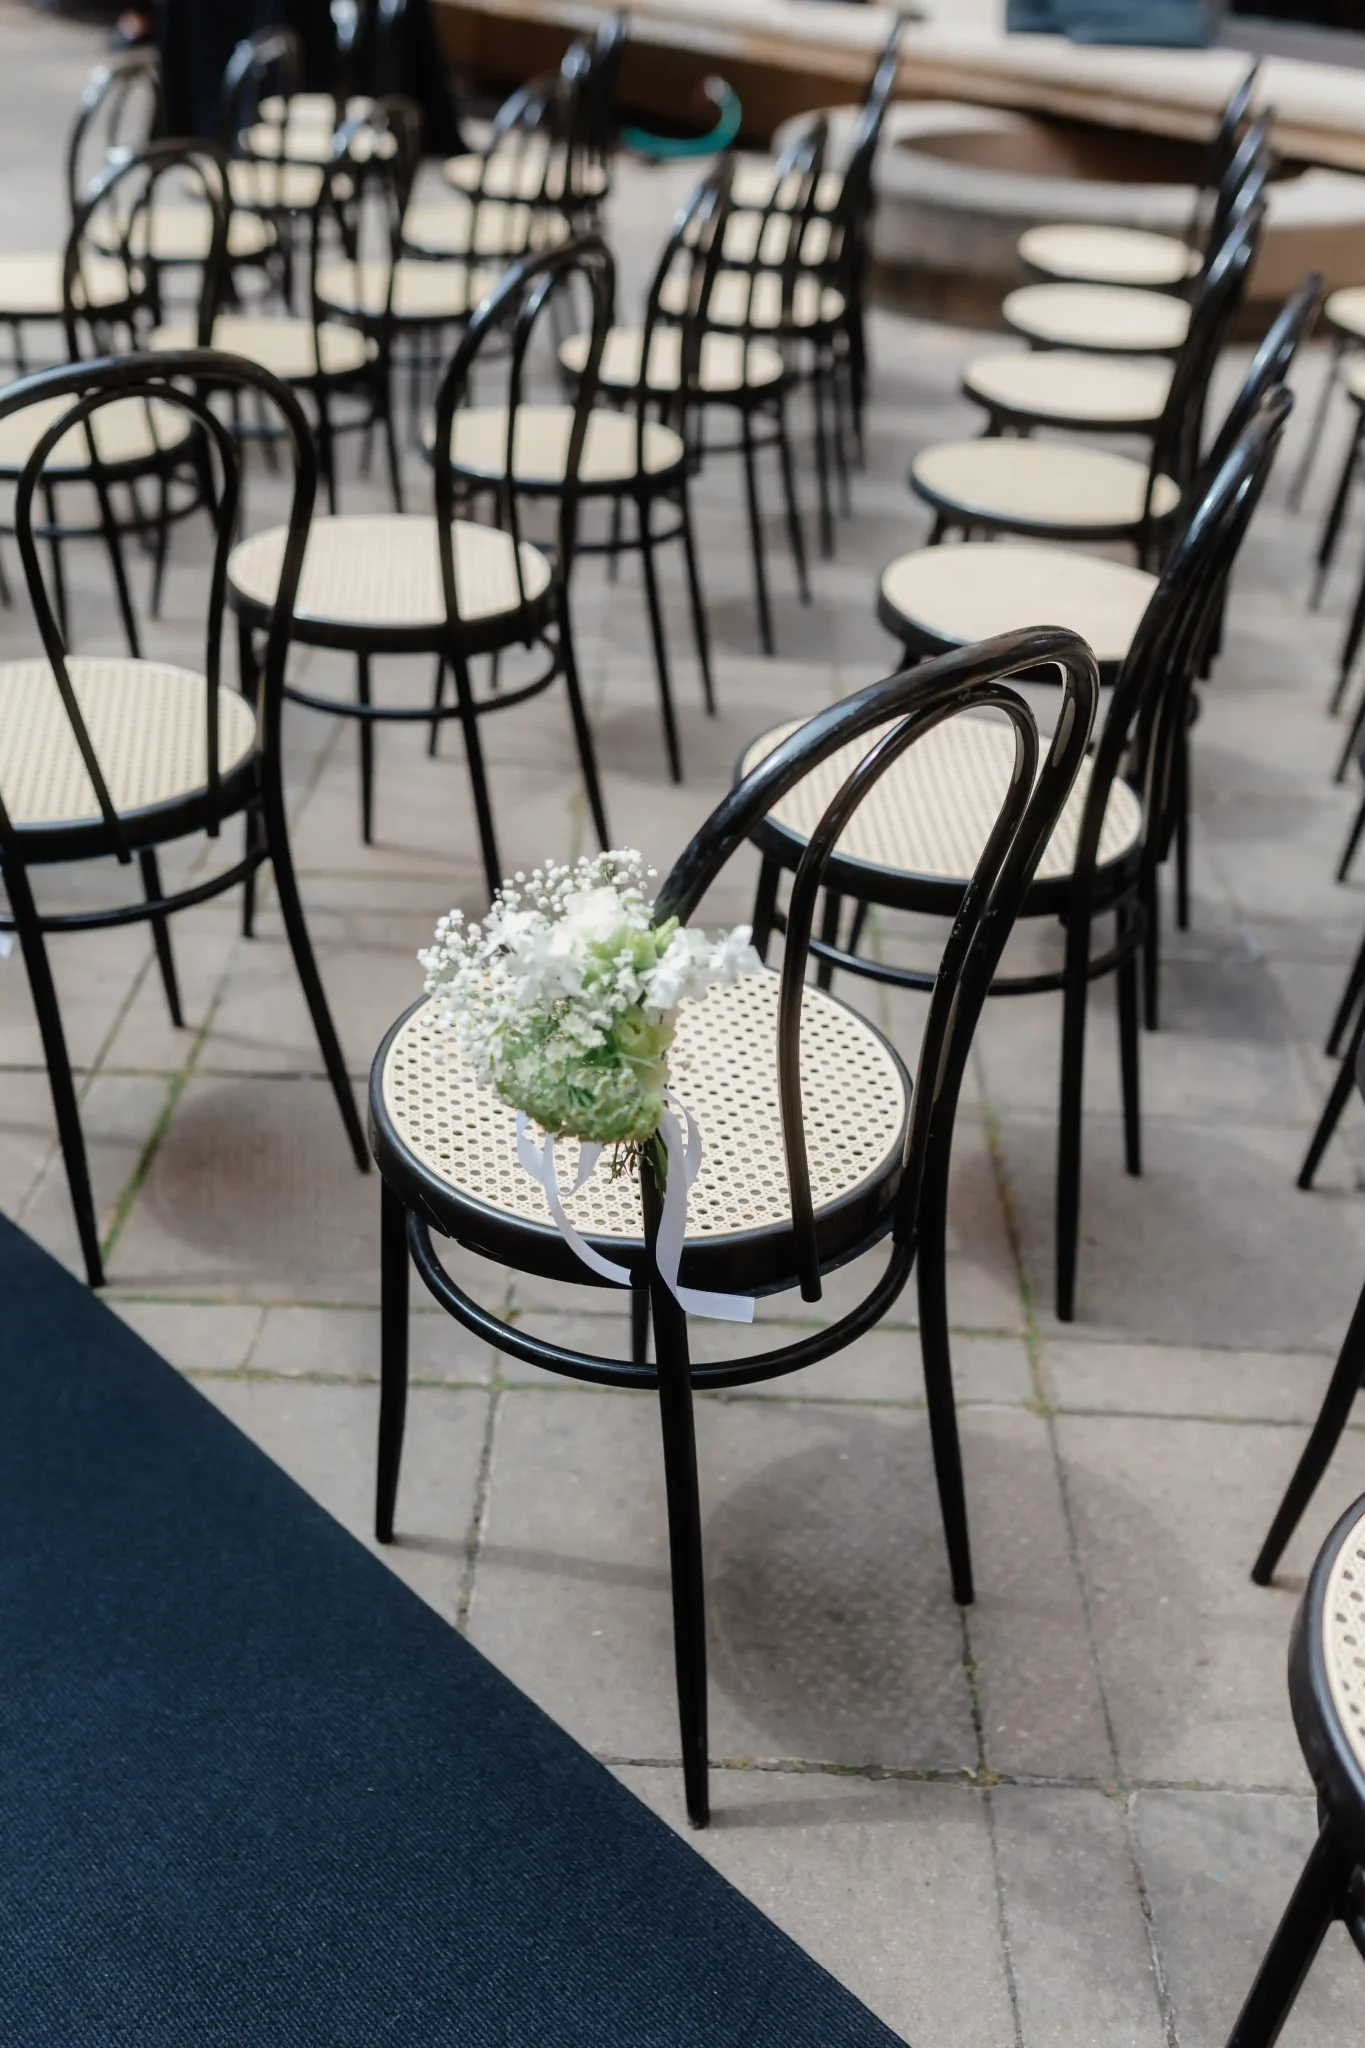 A row of black chairs with flowers on them.